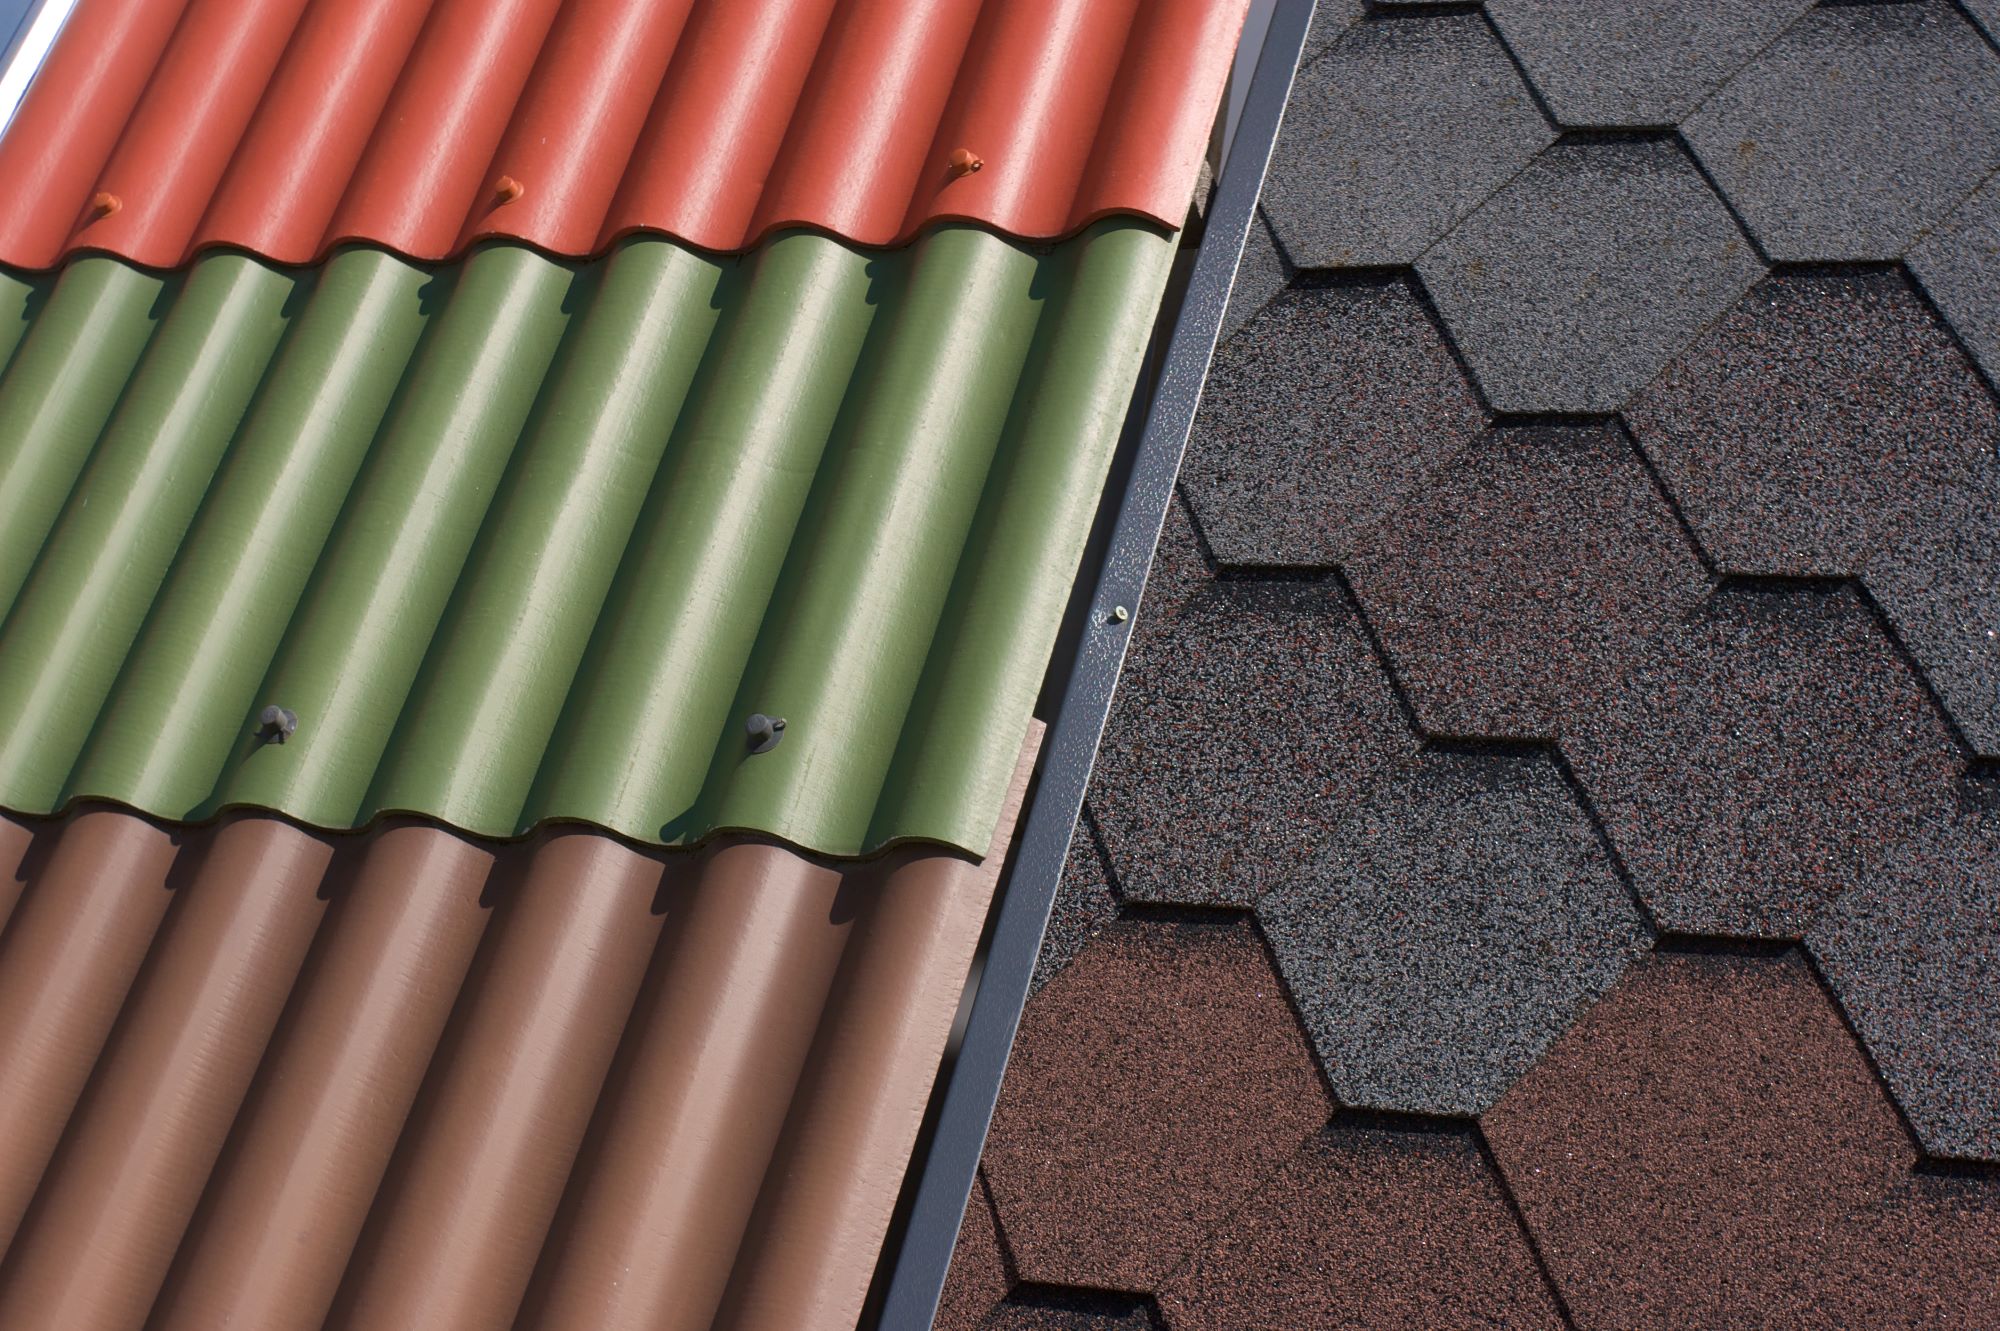 roofing material